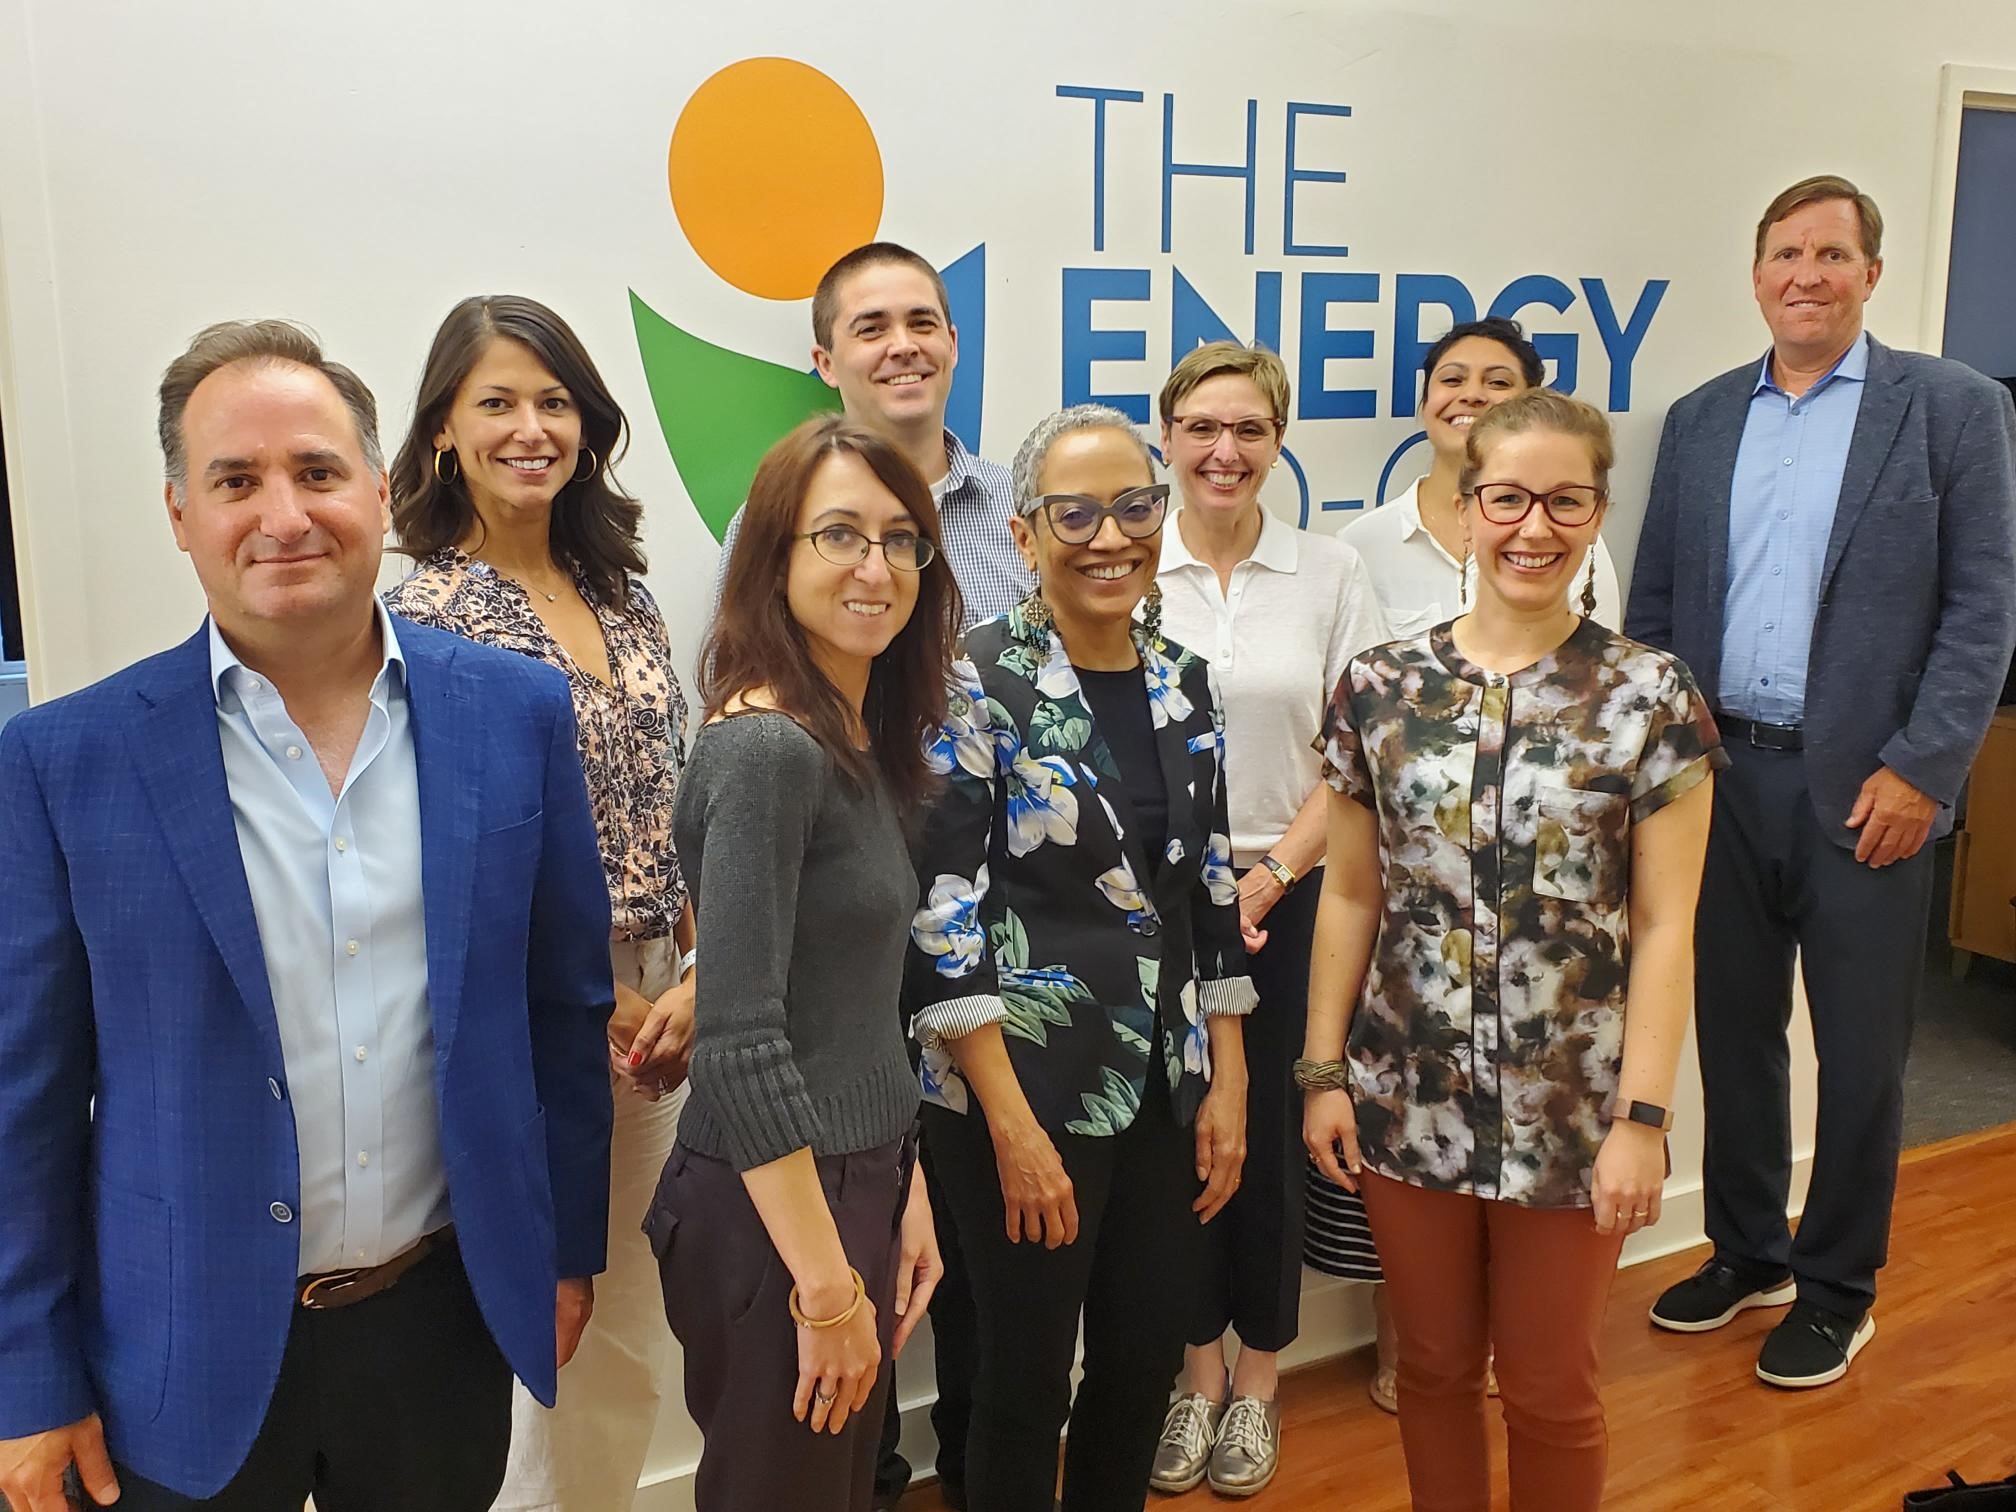 The Energy Co-op Staff & Board Reunites